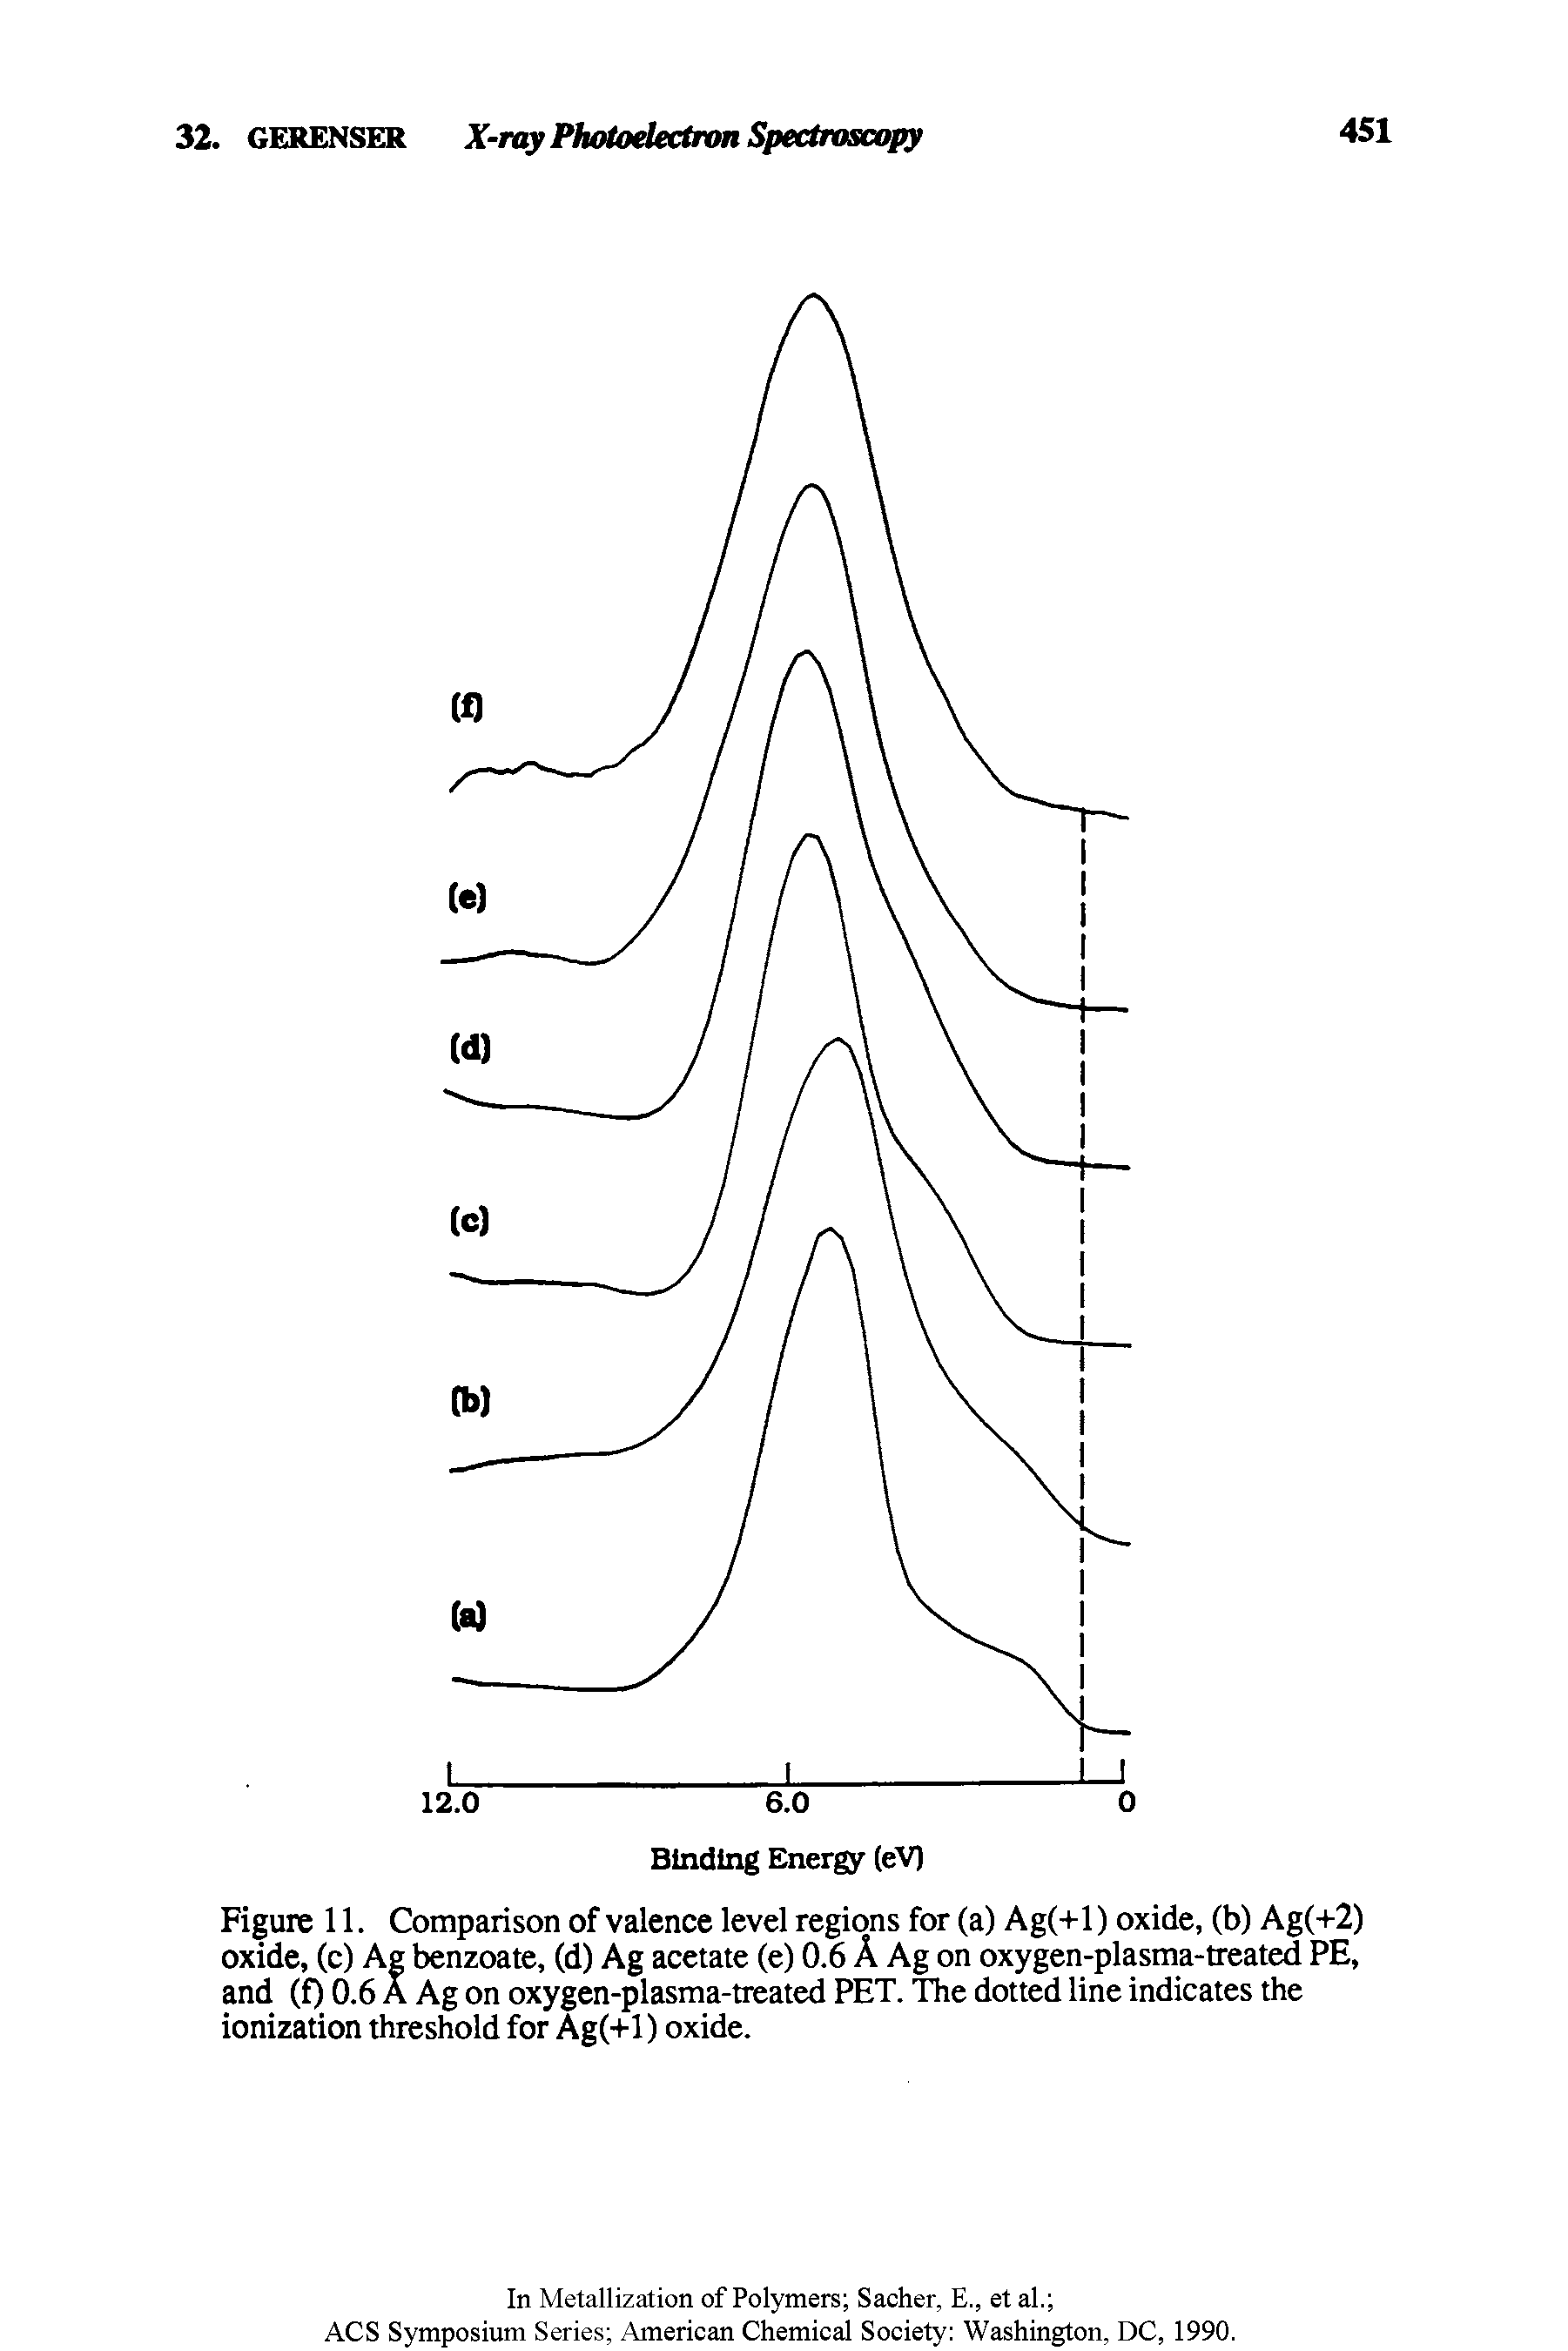 Figure 11. Comparison of valence level regions for (a) Ag(+1) oxide, (b) Ag(+2) oxide, (c) Ag benzoate, (d) Ag acetate (e) 0.6 A Ag on oxygen-plasma-treated PE, and (f) 0.6 A Ag on oxygen-plasma-treated PET. The dotted line indicates the ionization threshold for Ag(+1) oxide.